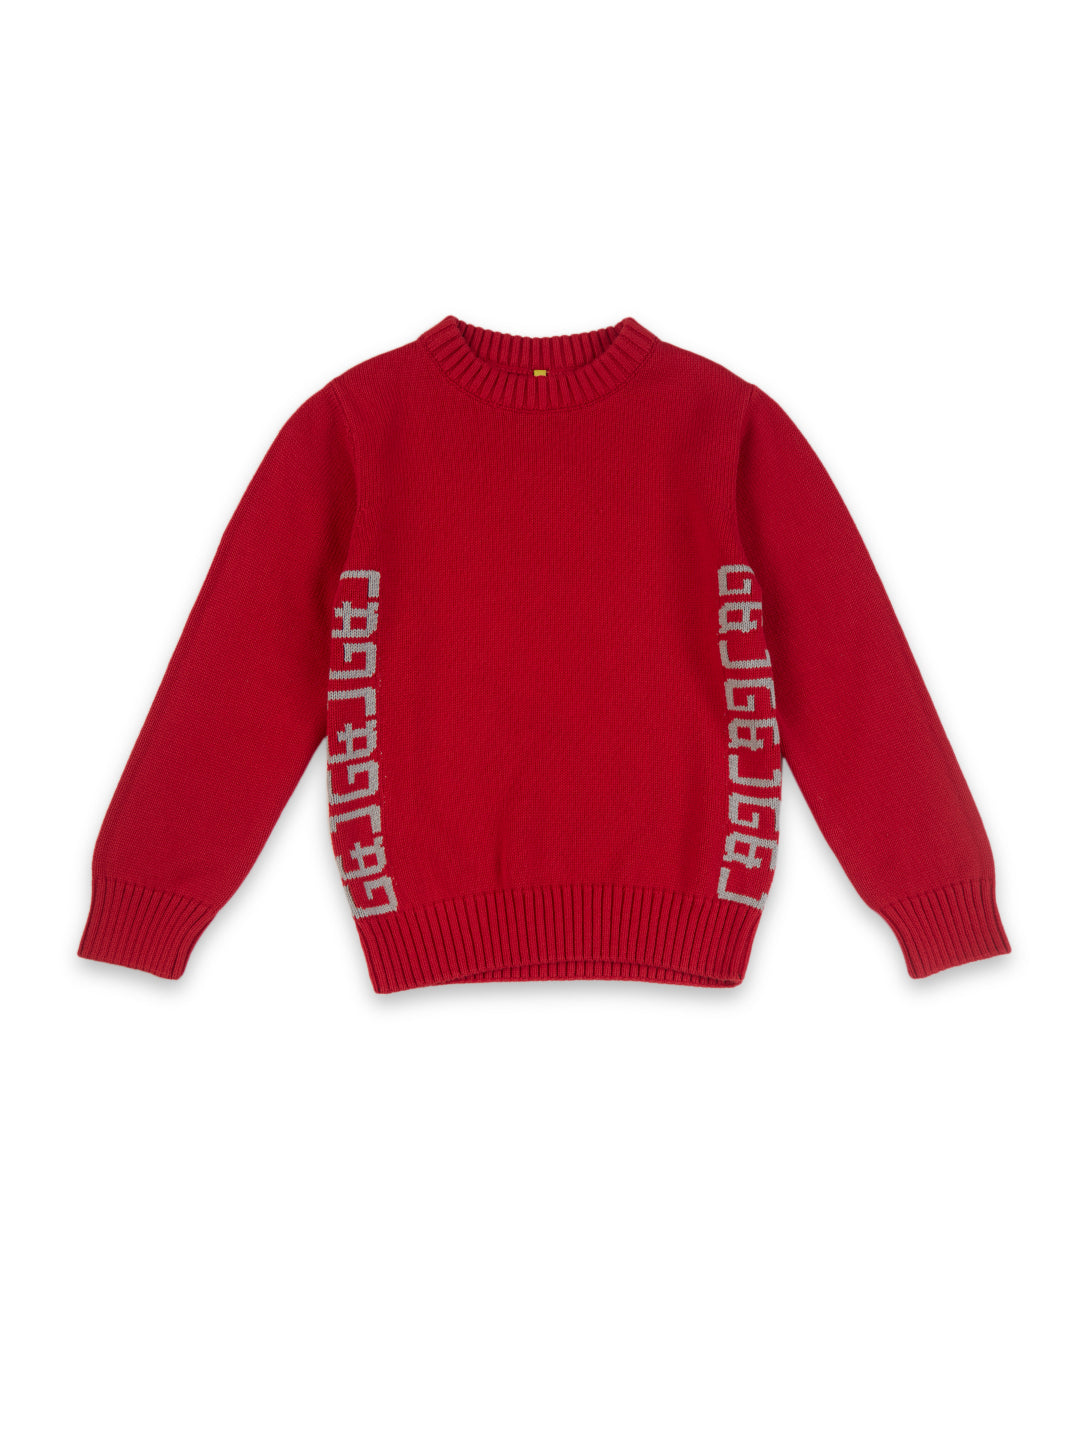 Boys Red Applique Woven Sweater